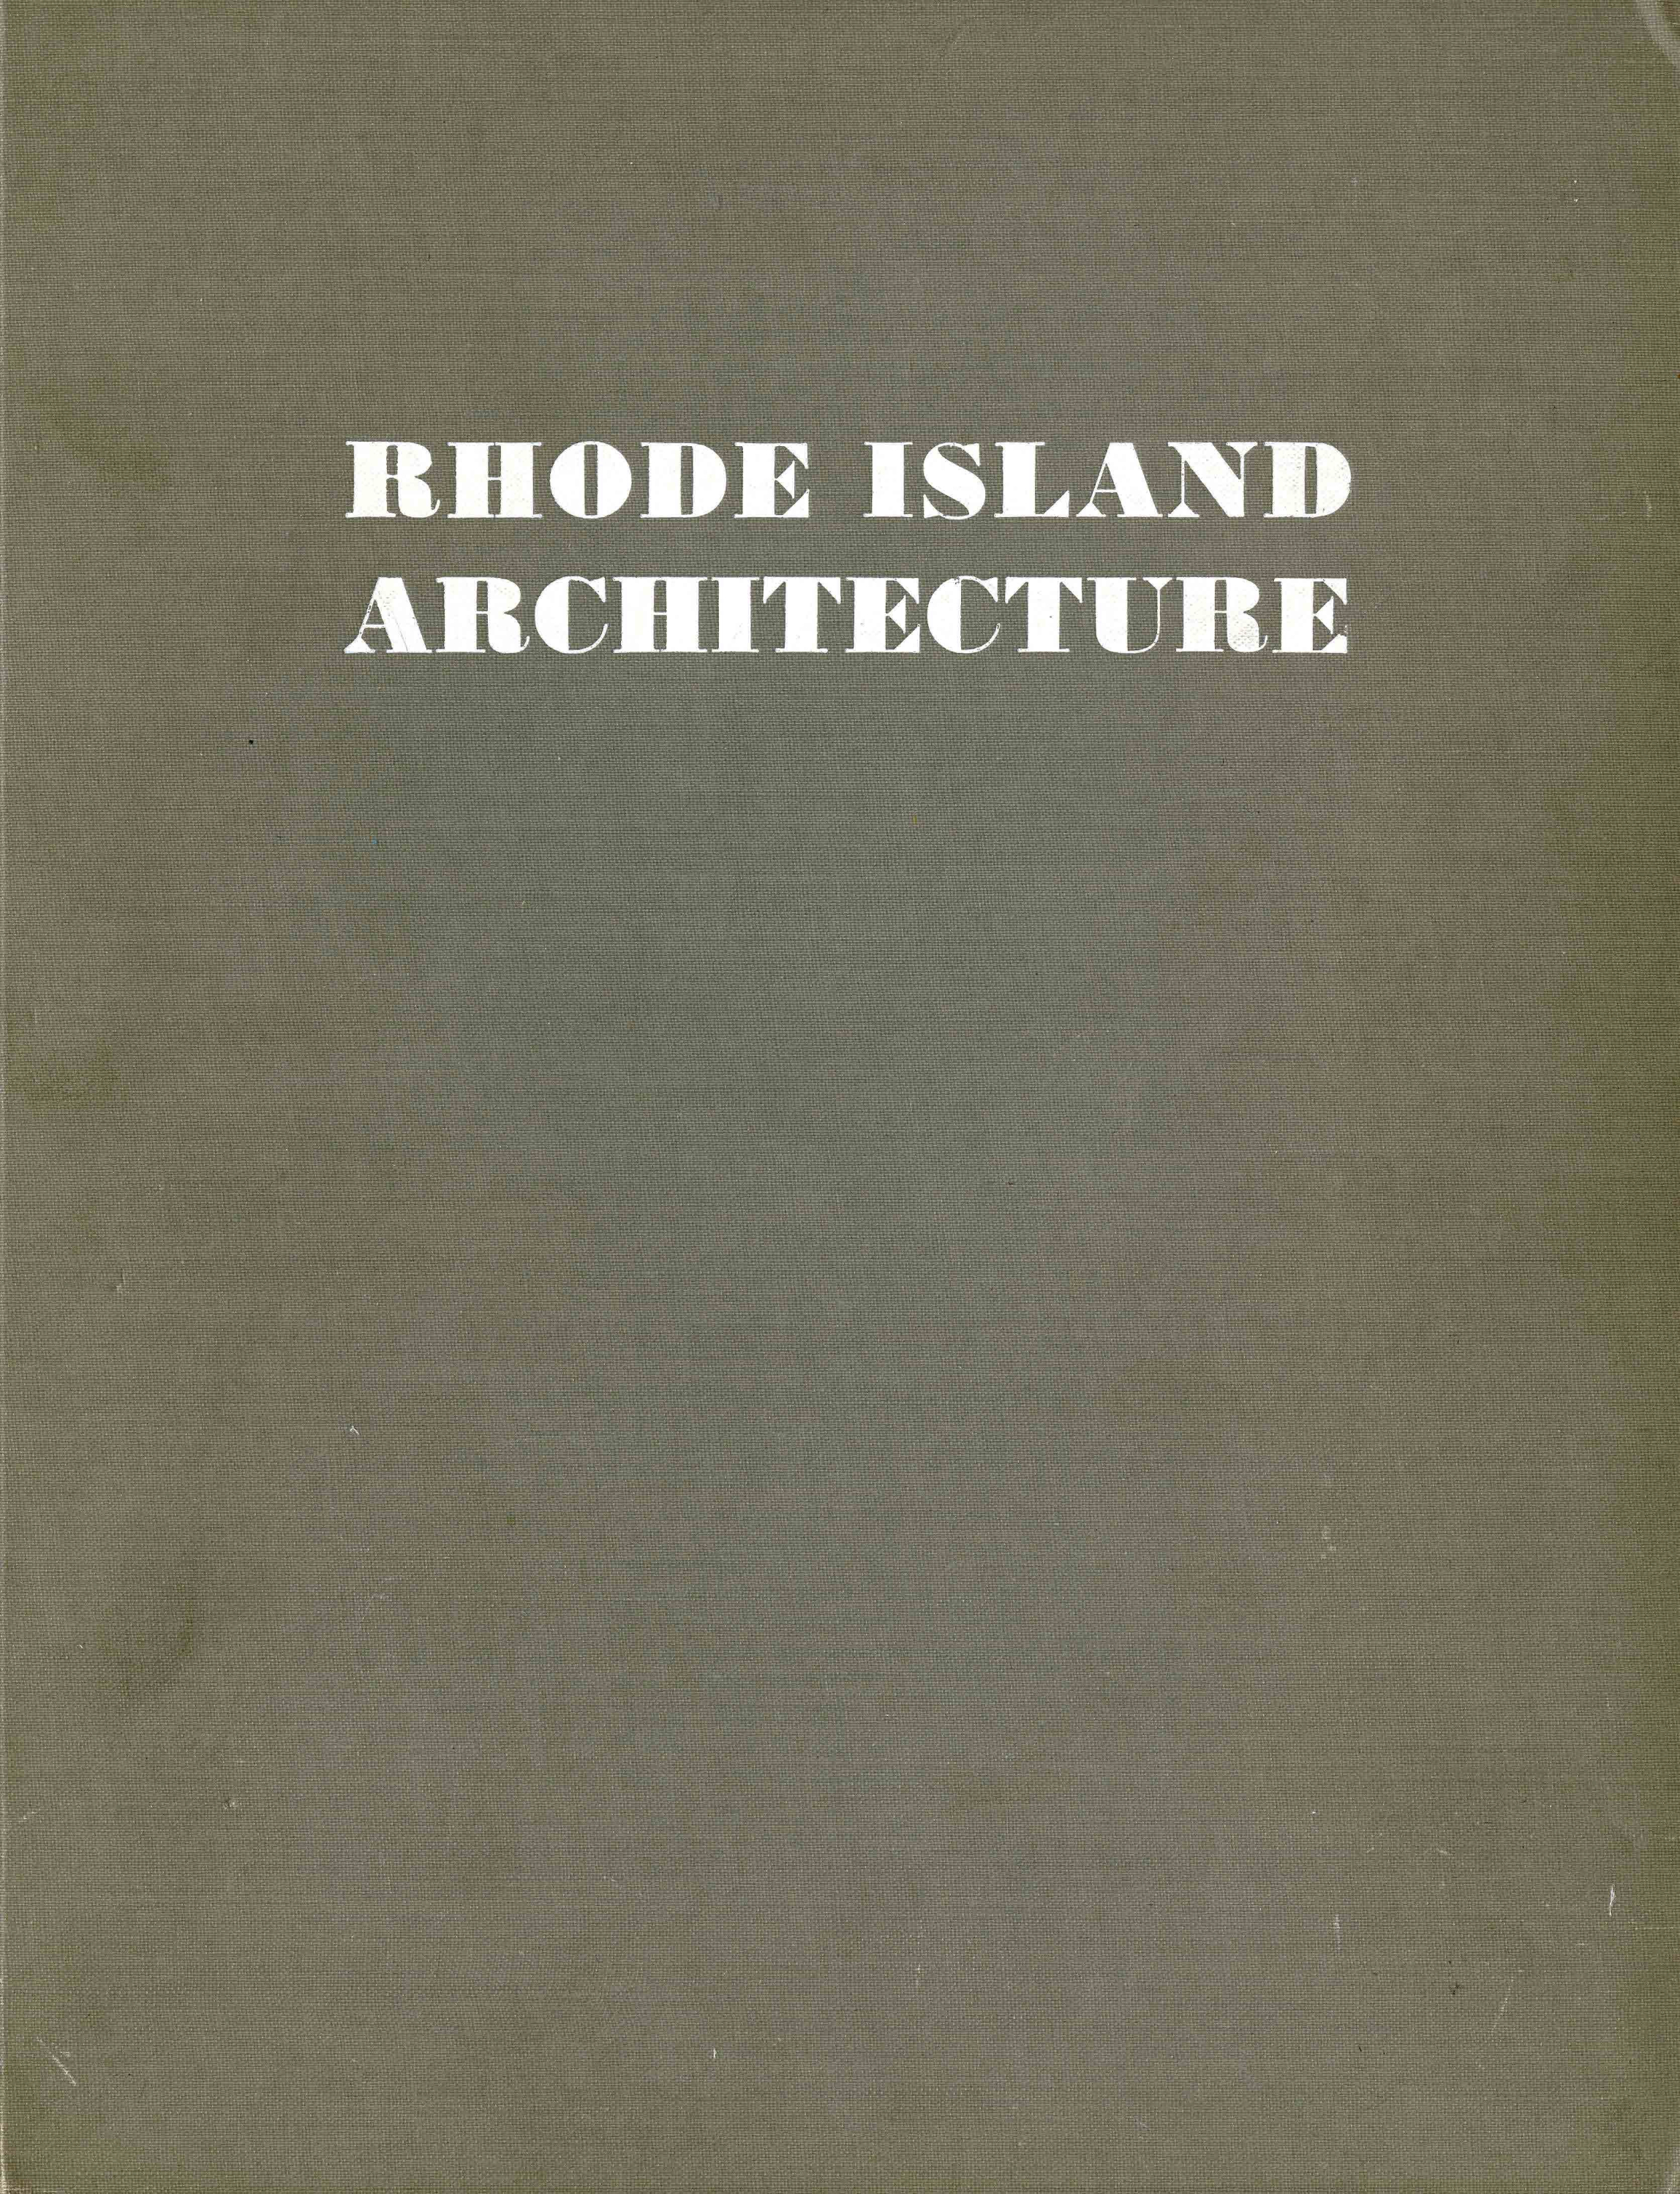 Lit_ID 3482 Rhode Island Architecture_cover.tif